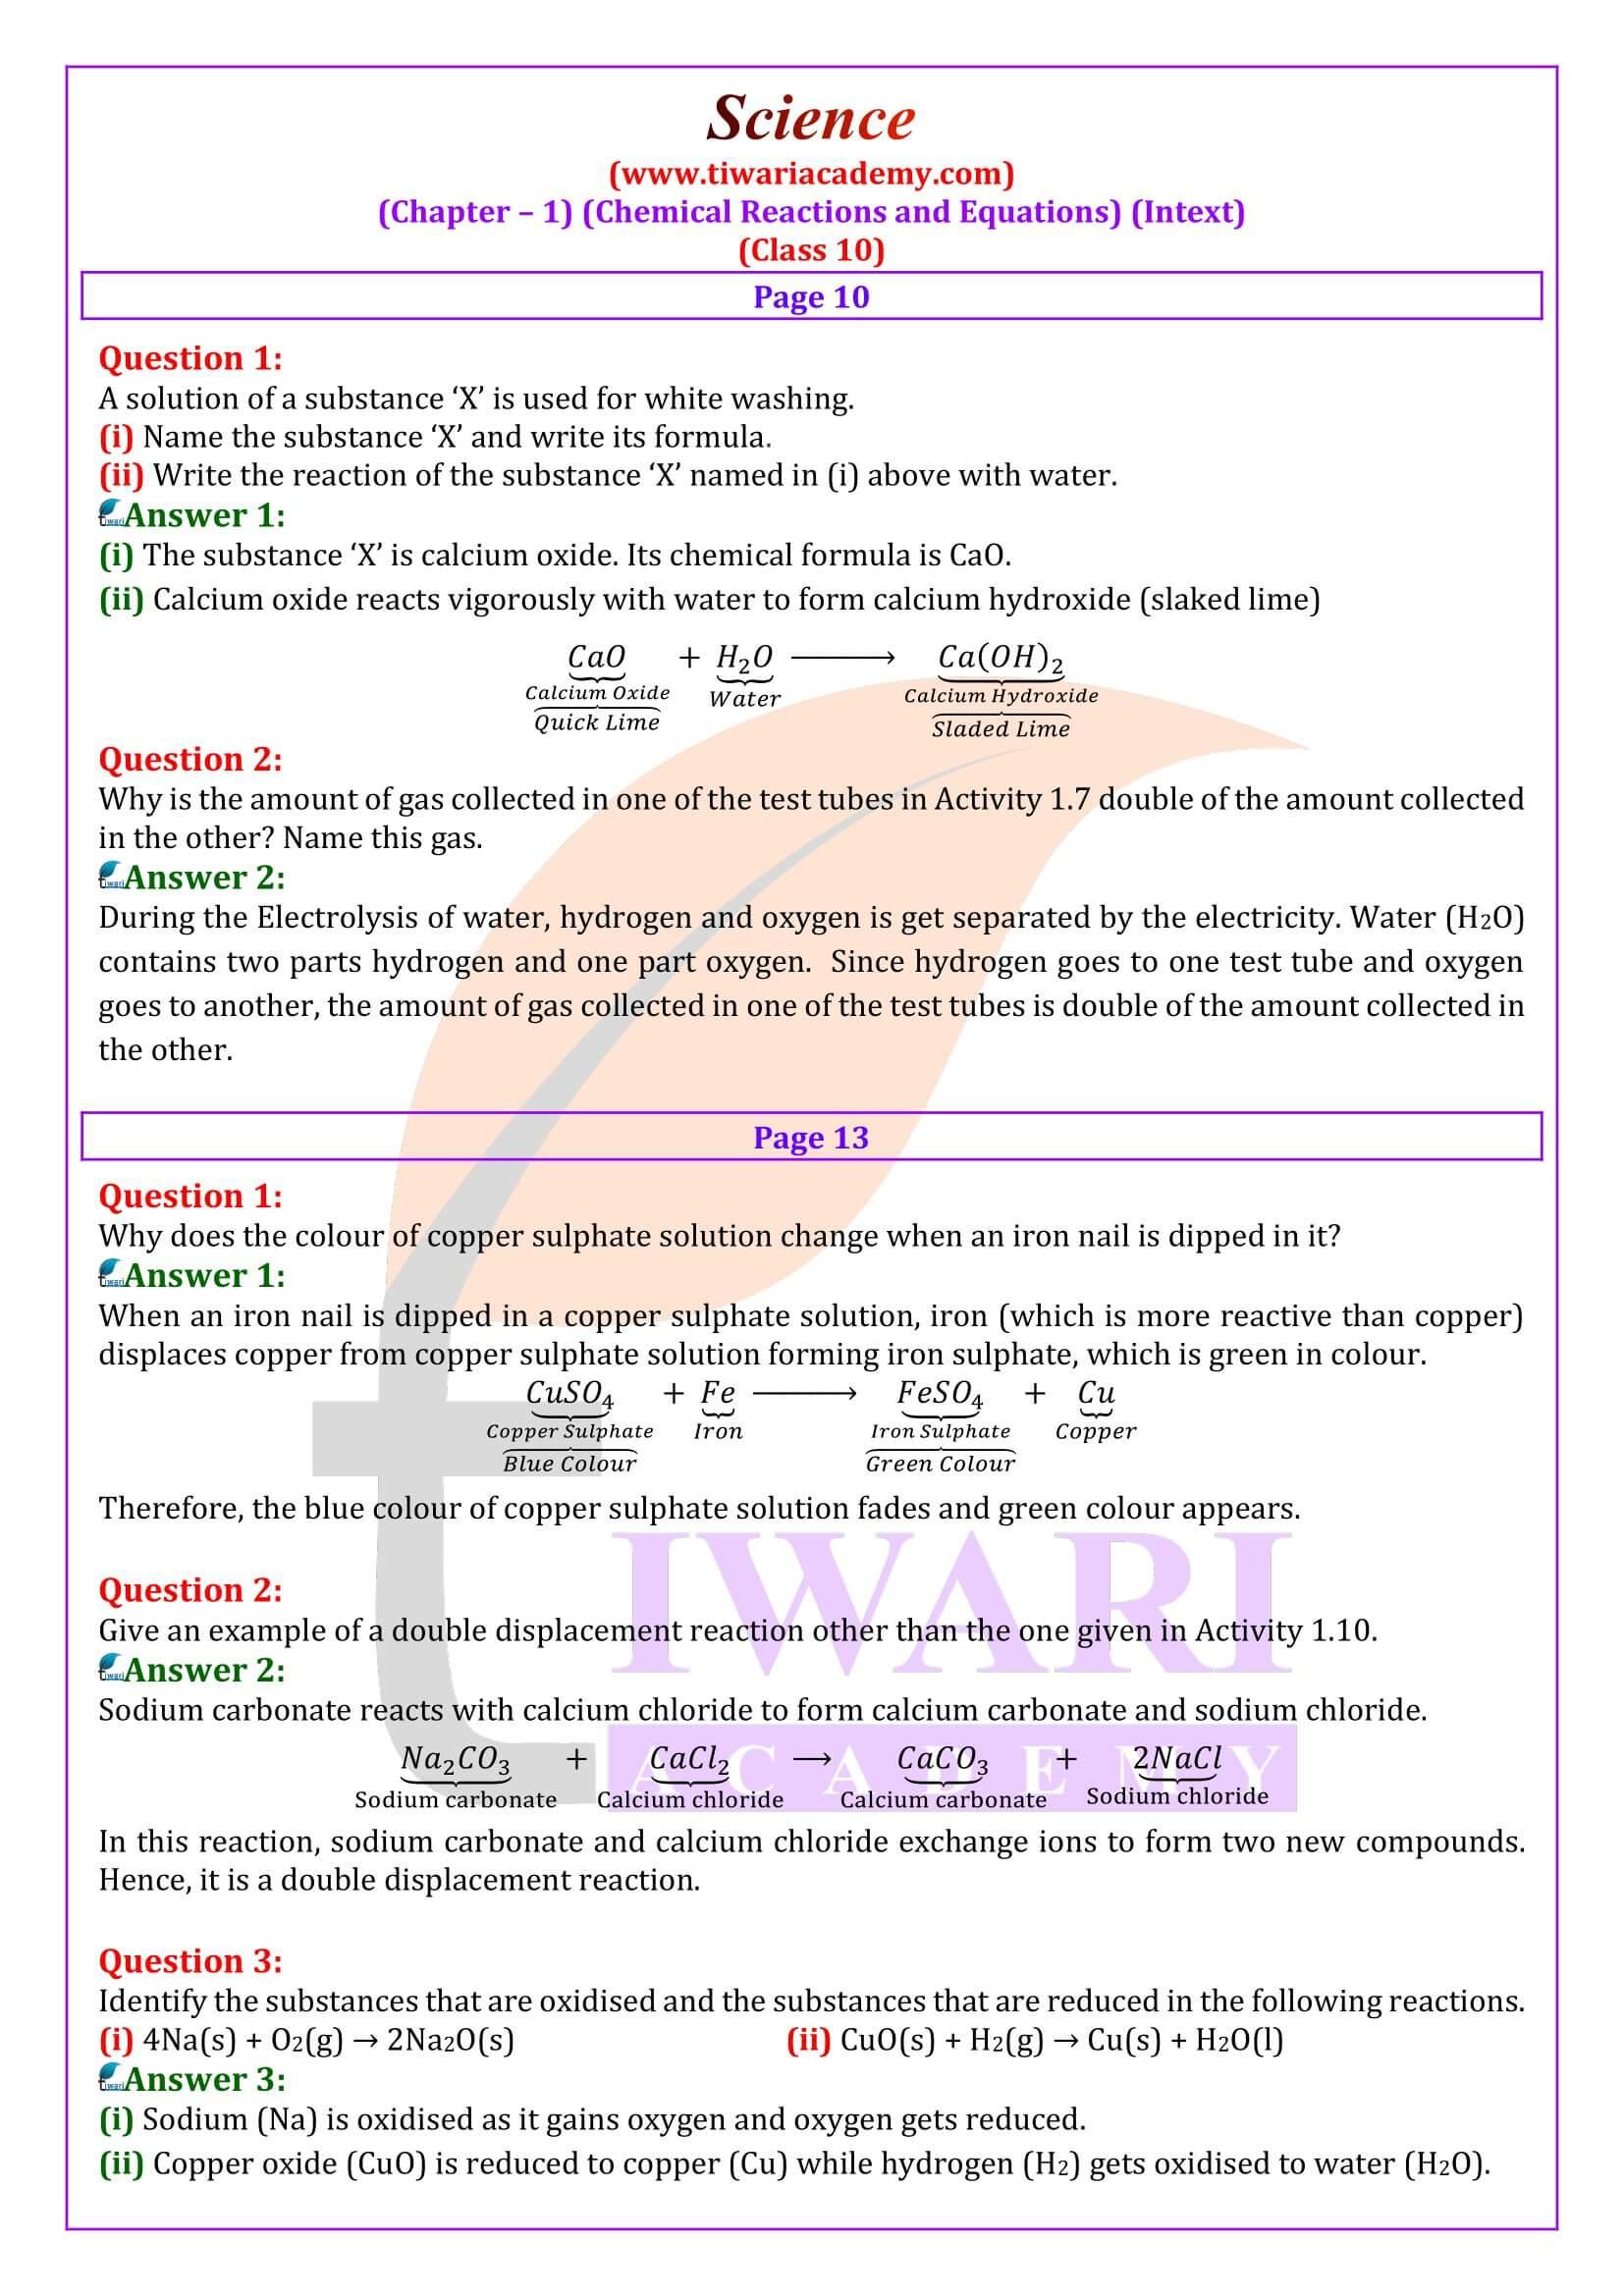 science assignment for class 10 pdf